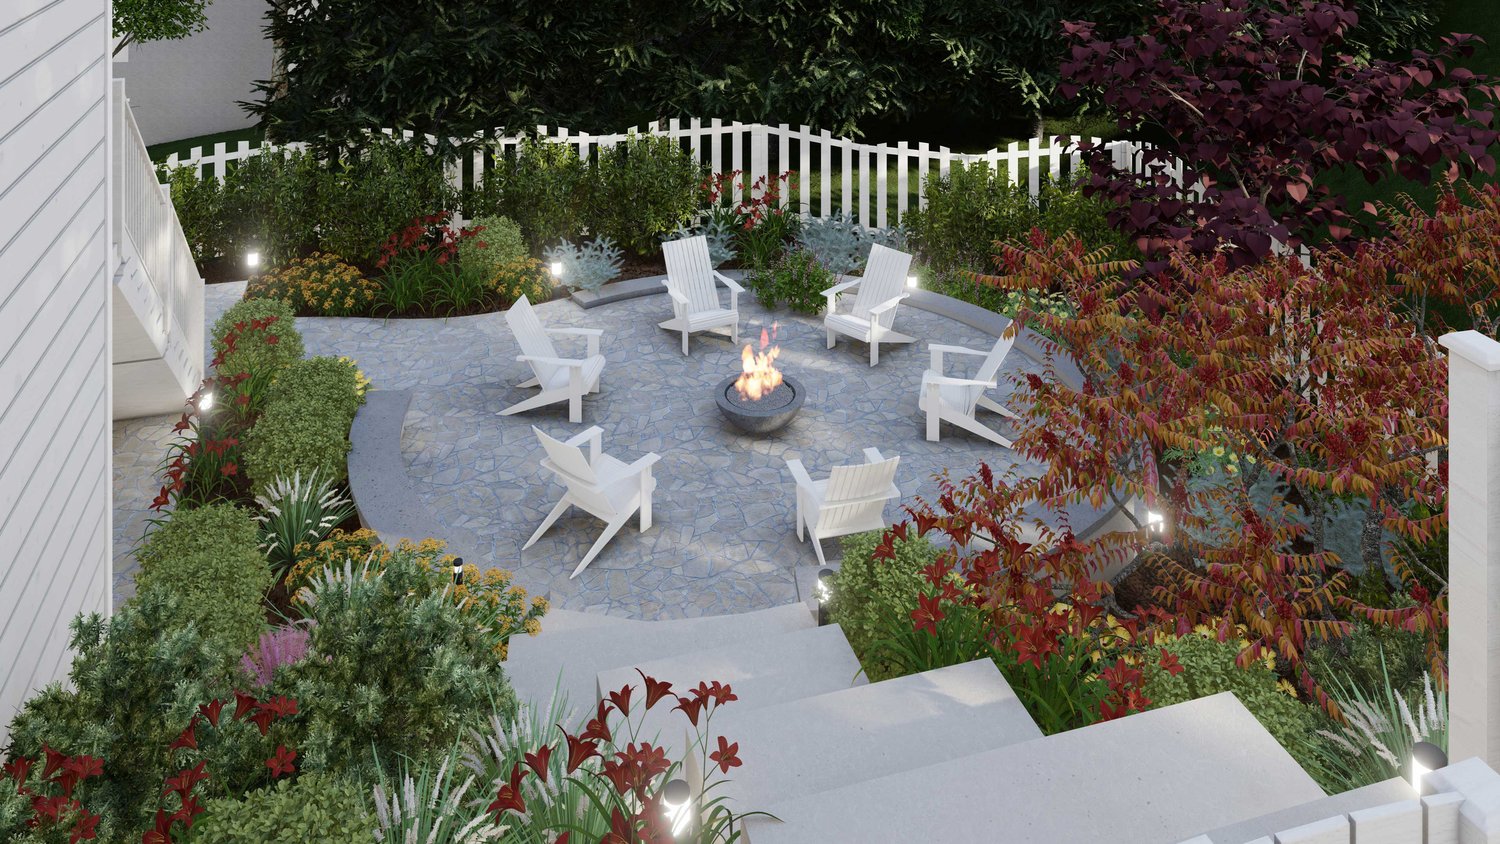 Arlington overhead view of concrete paver patio with fire pit seating area, concrete stairway and colorful floral surrounding